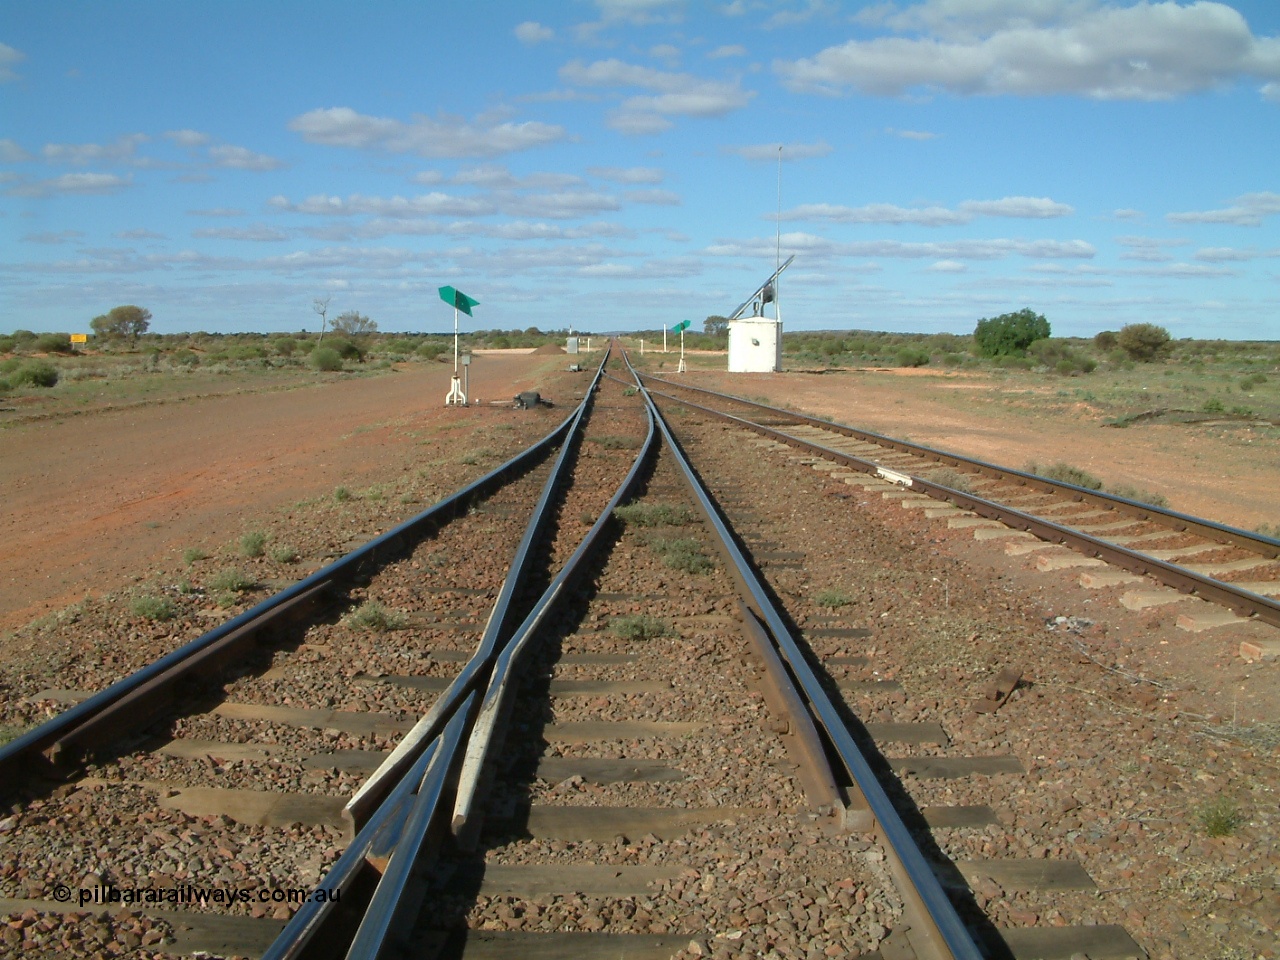 030415 155423
Tarcoola, looking east along the mainline towards Port Augusta, Central Australian Railway coming in from the left, Trans Australian Railway is the middle road with the loop on the right. Tarcoola is the junction for the TAR and CAR railways situated 504.5 km from the 0 km datum at Coonamia outside of Port Pirie. [url=https://goo.gl/maps/bJyV81LpHFFg7PGs7]GeoData location[/url]. 15th April 2003.
